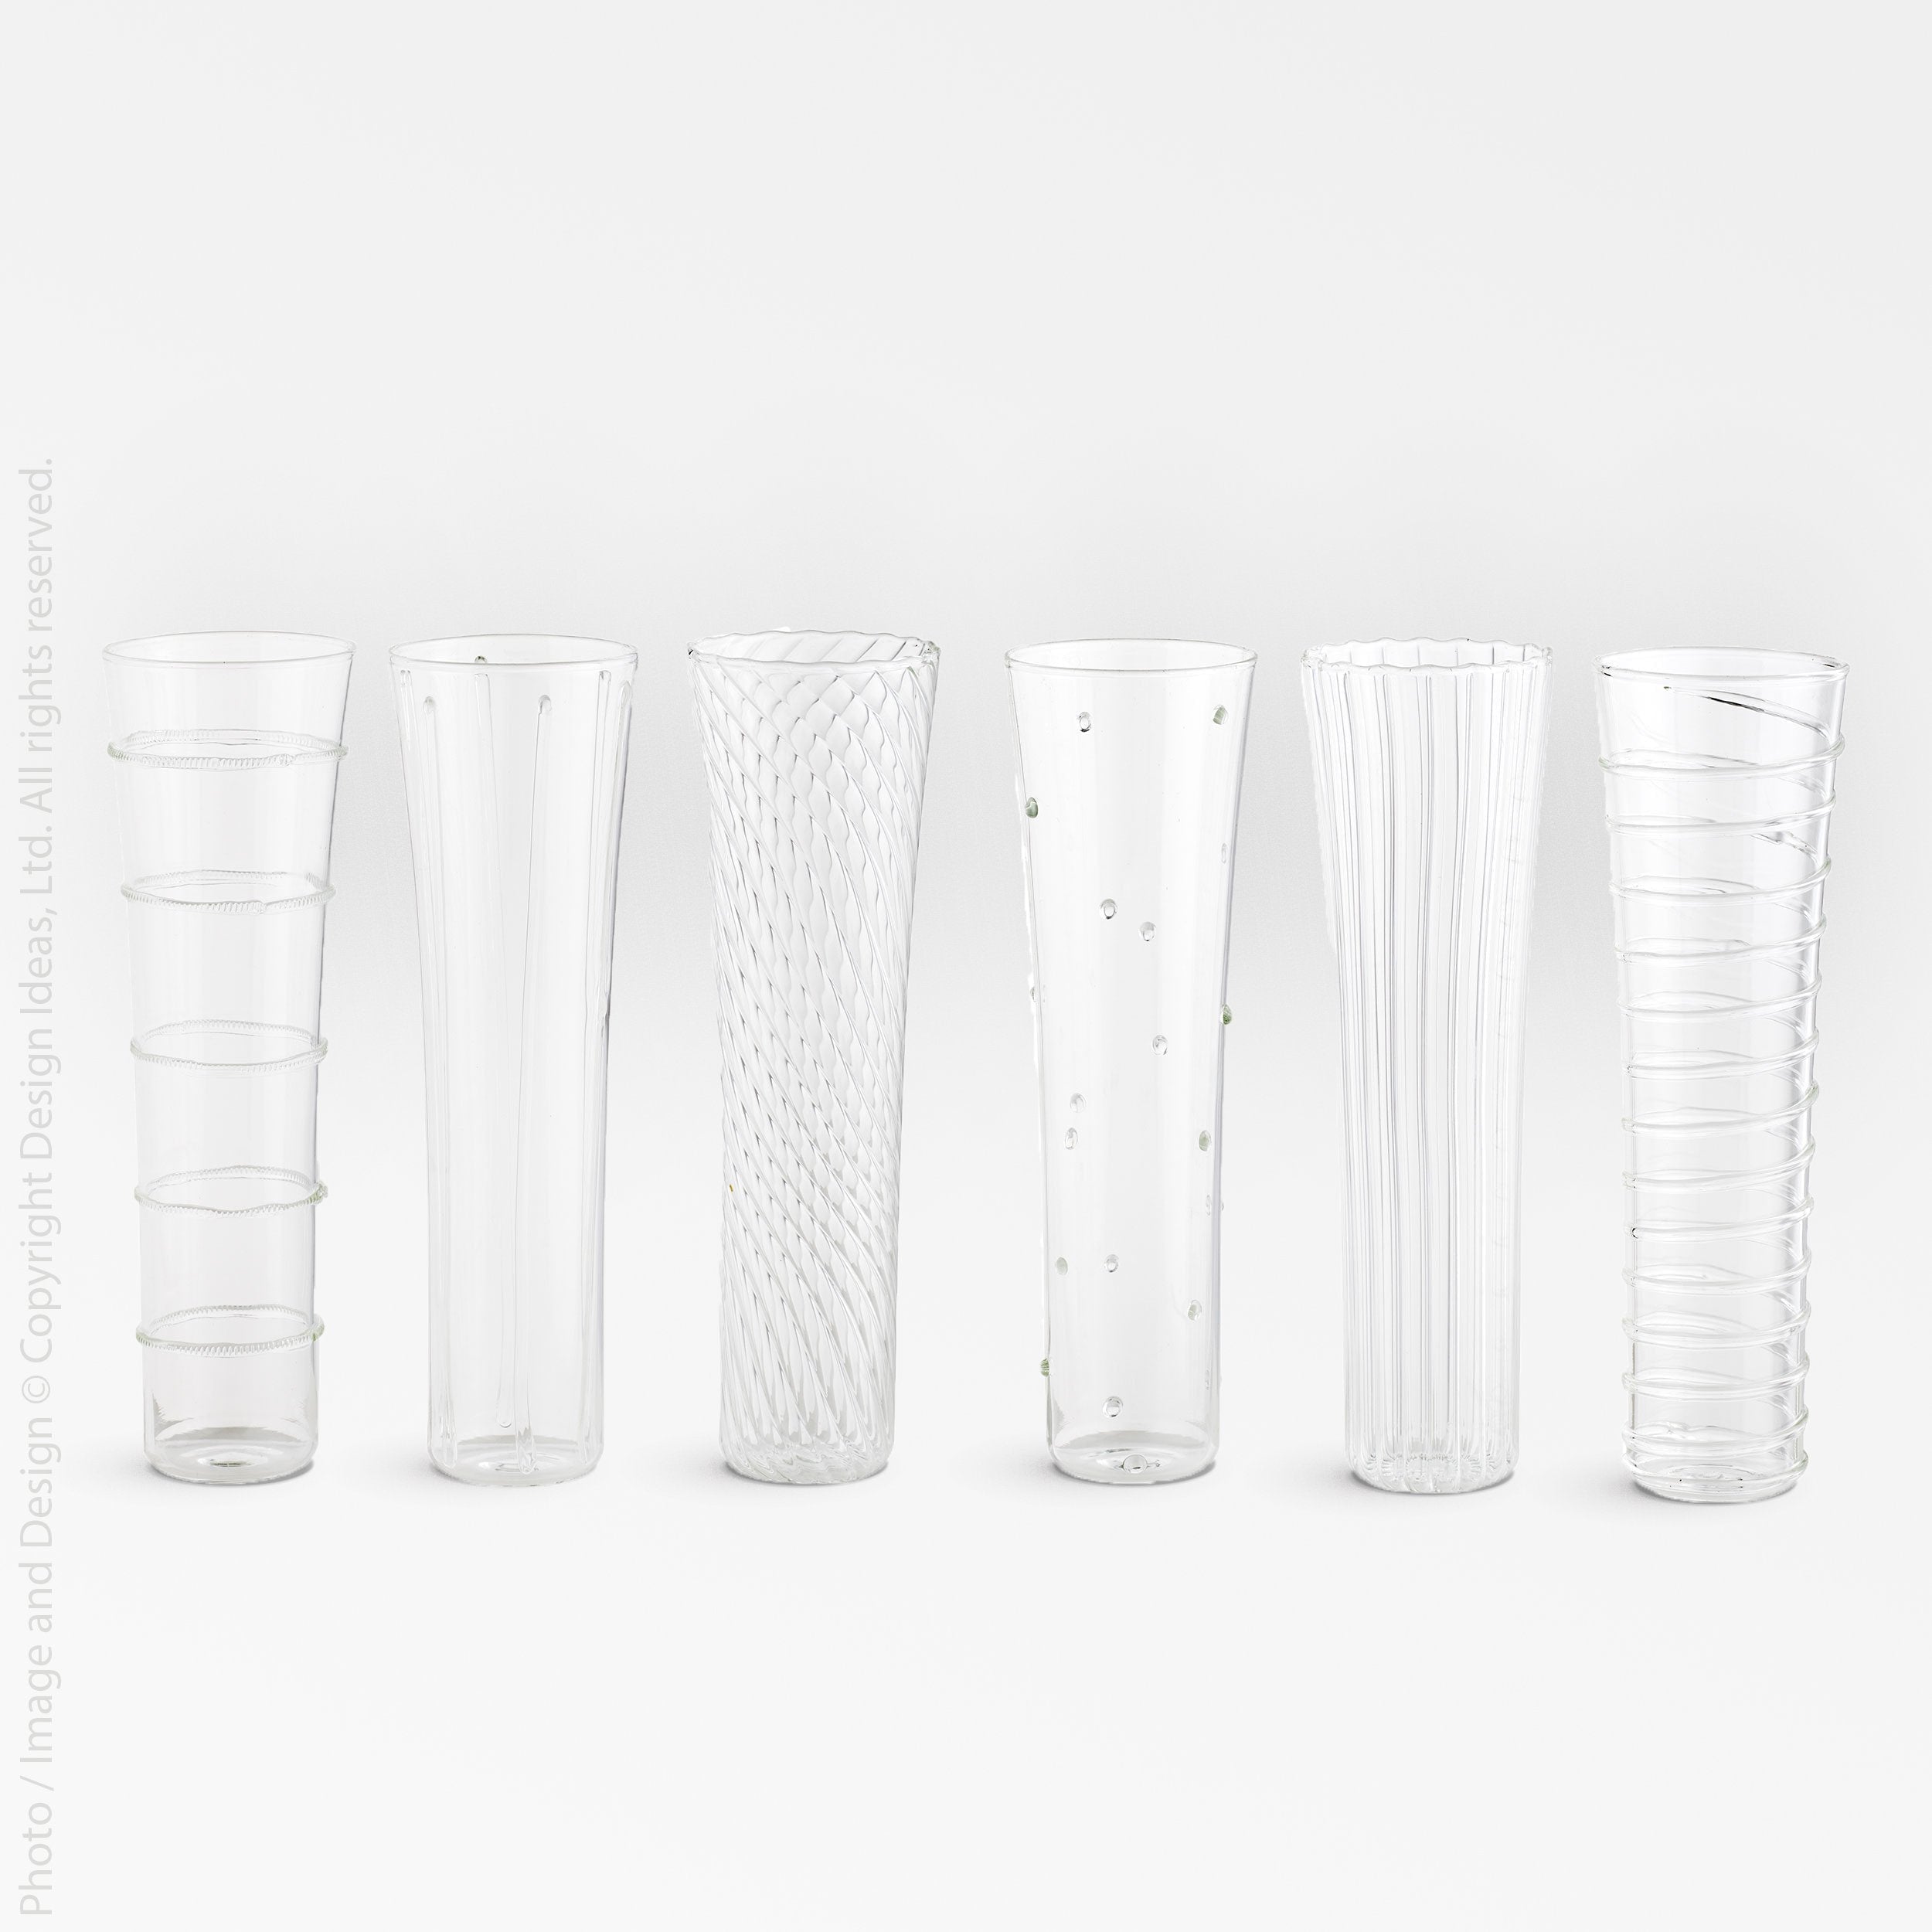 Drinking Glass Set 16 Pcs, Include Eight 16 Oz & Eight 9.8 Oz Glasses